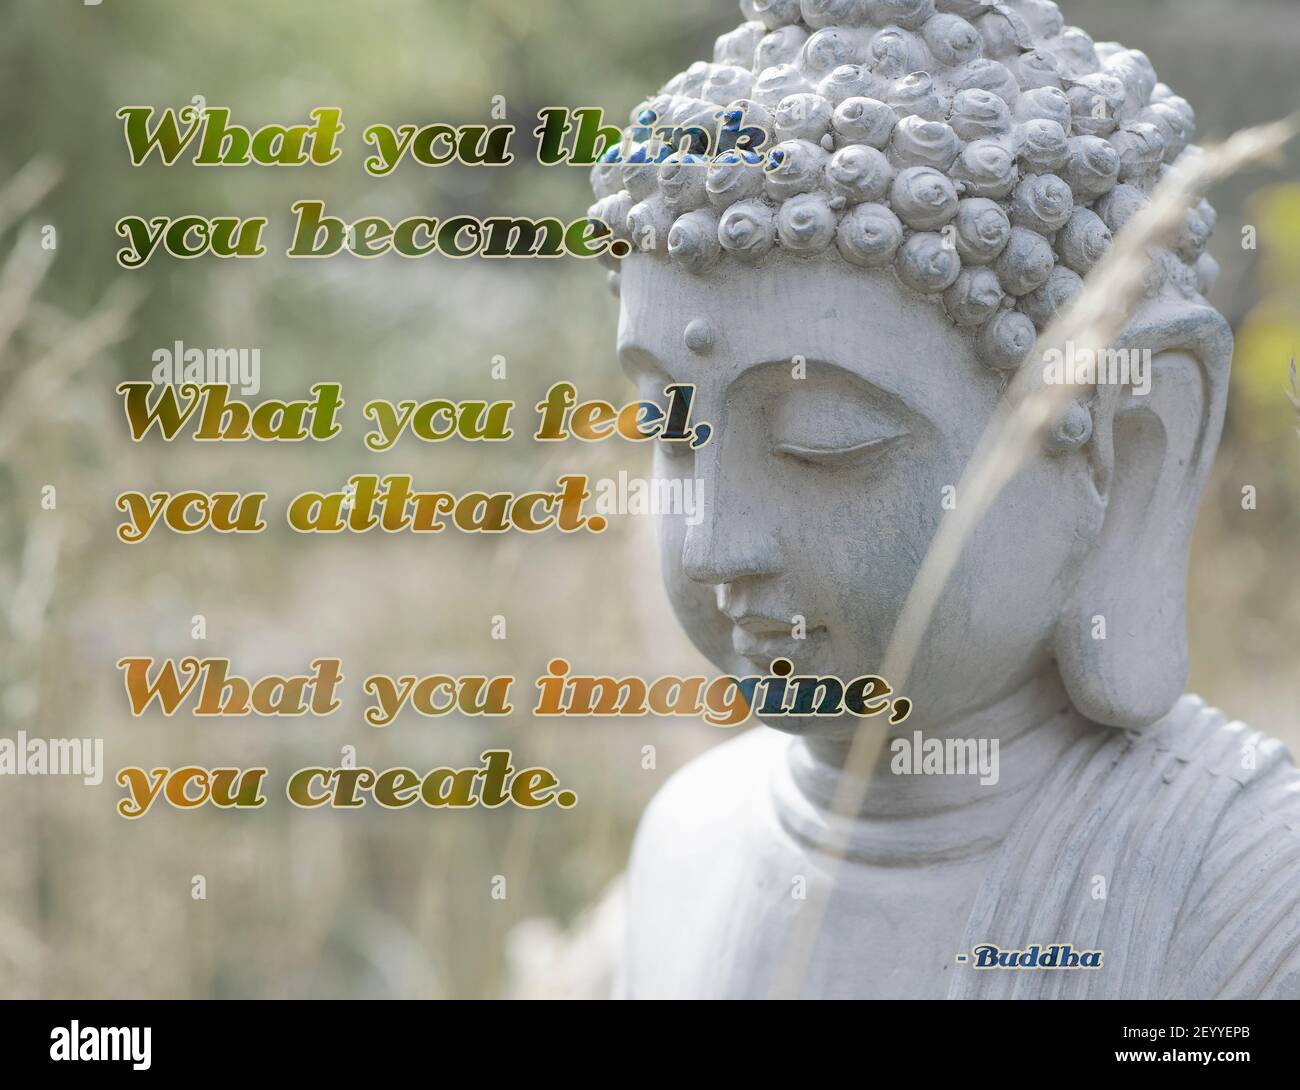 Inspirational quote from Buddha about the mind. 'What you think, you become. What you feel, you attract. What you imagine, you create.' Stock Photo